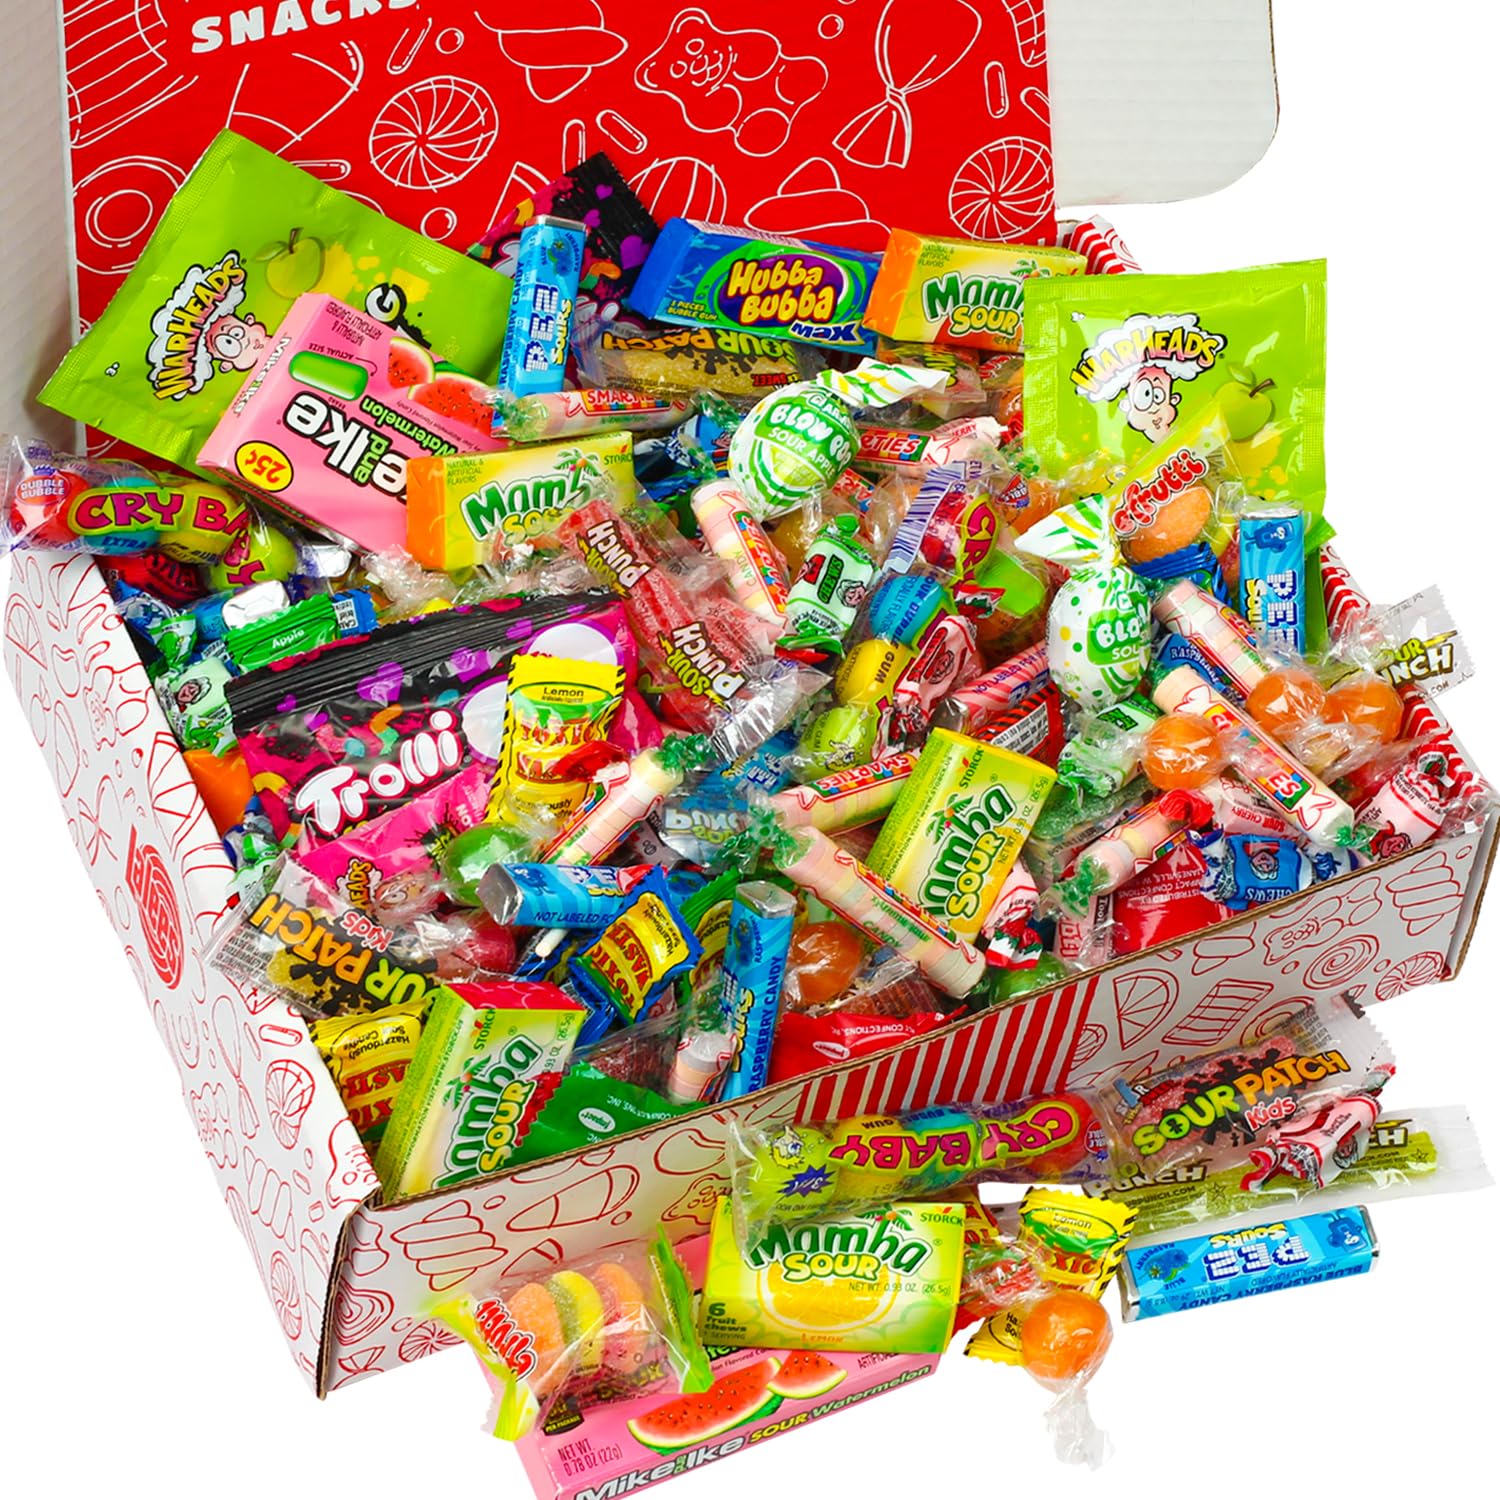 10 Best Candy Subscription Boxes Of 2023 - Chocolate, Sour Candy,  International Candy